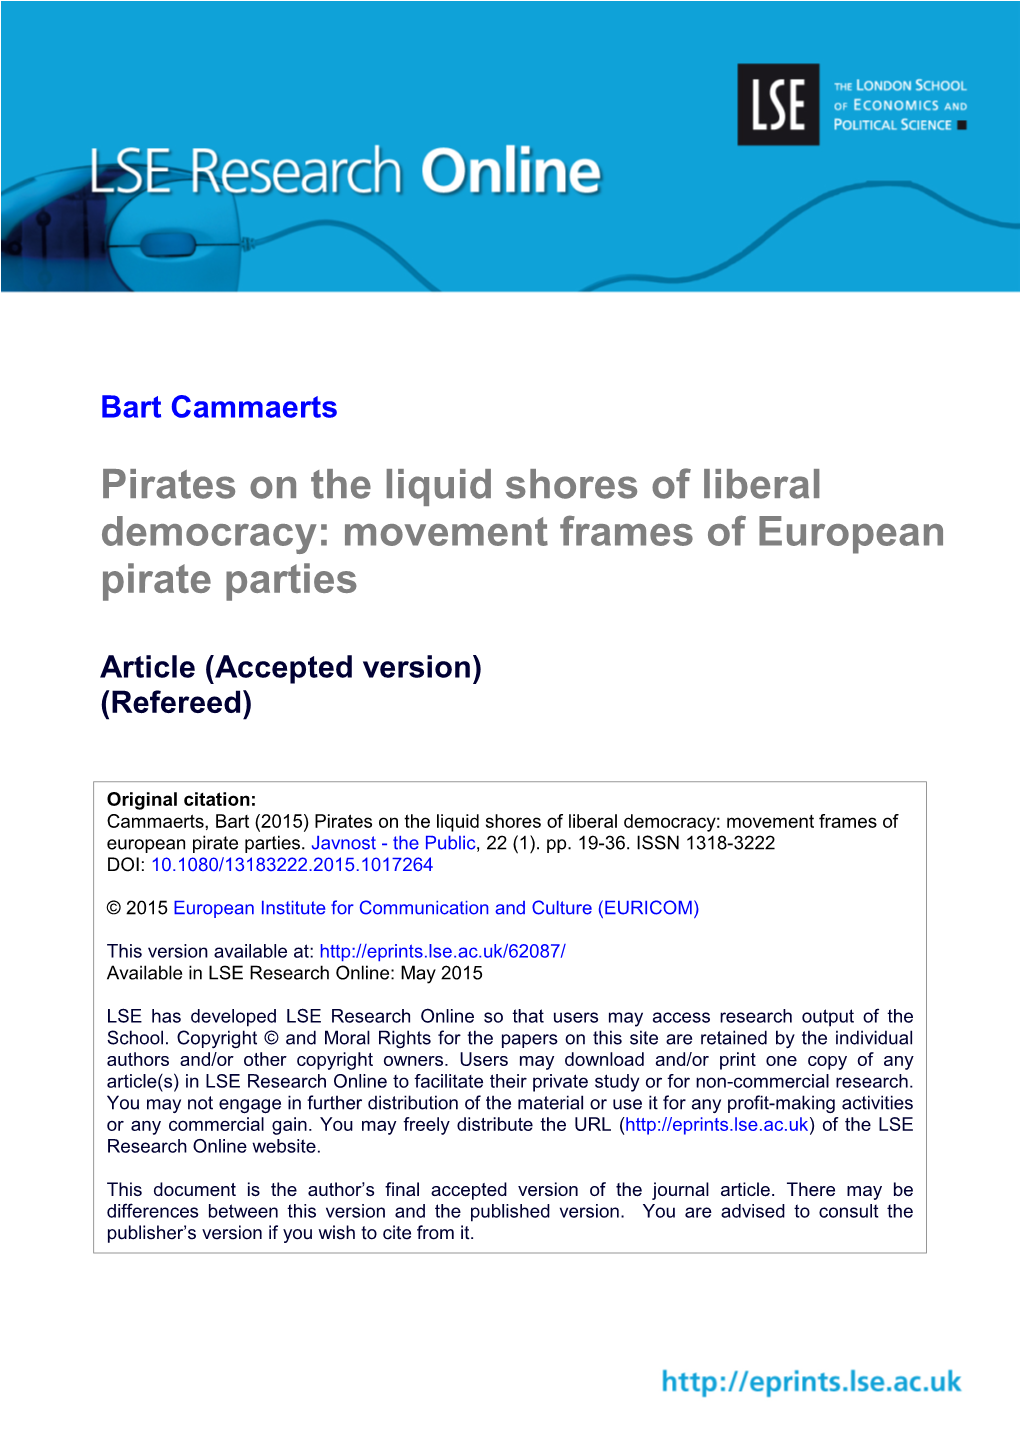 Pirates on the Liquid Shores of Liberal Democracy: Movement Frames of European Pirate Parties